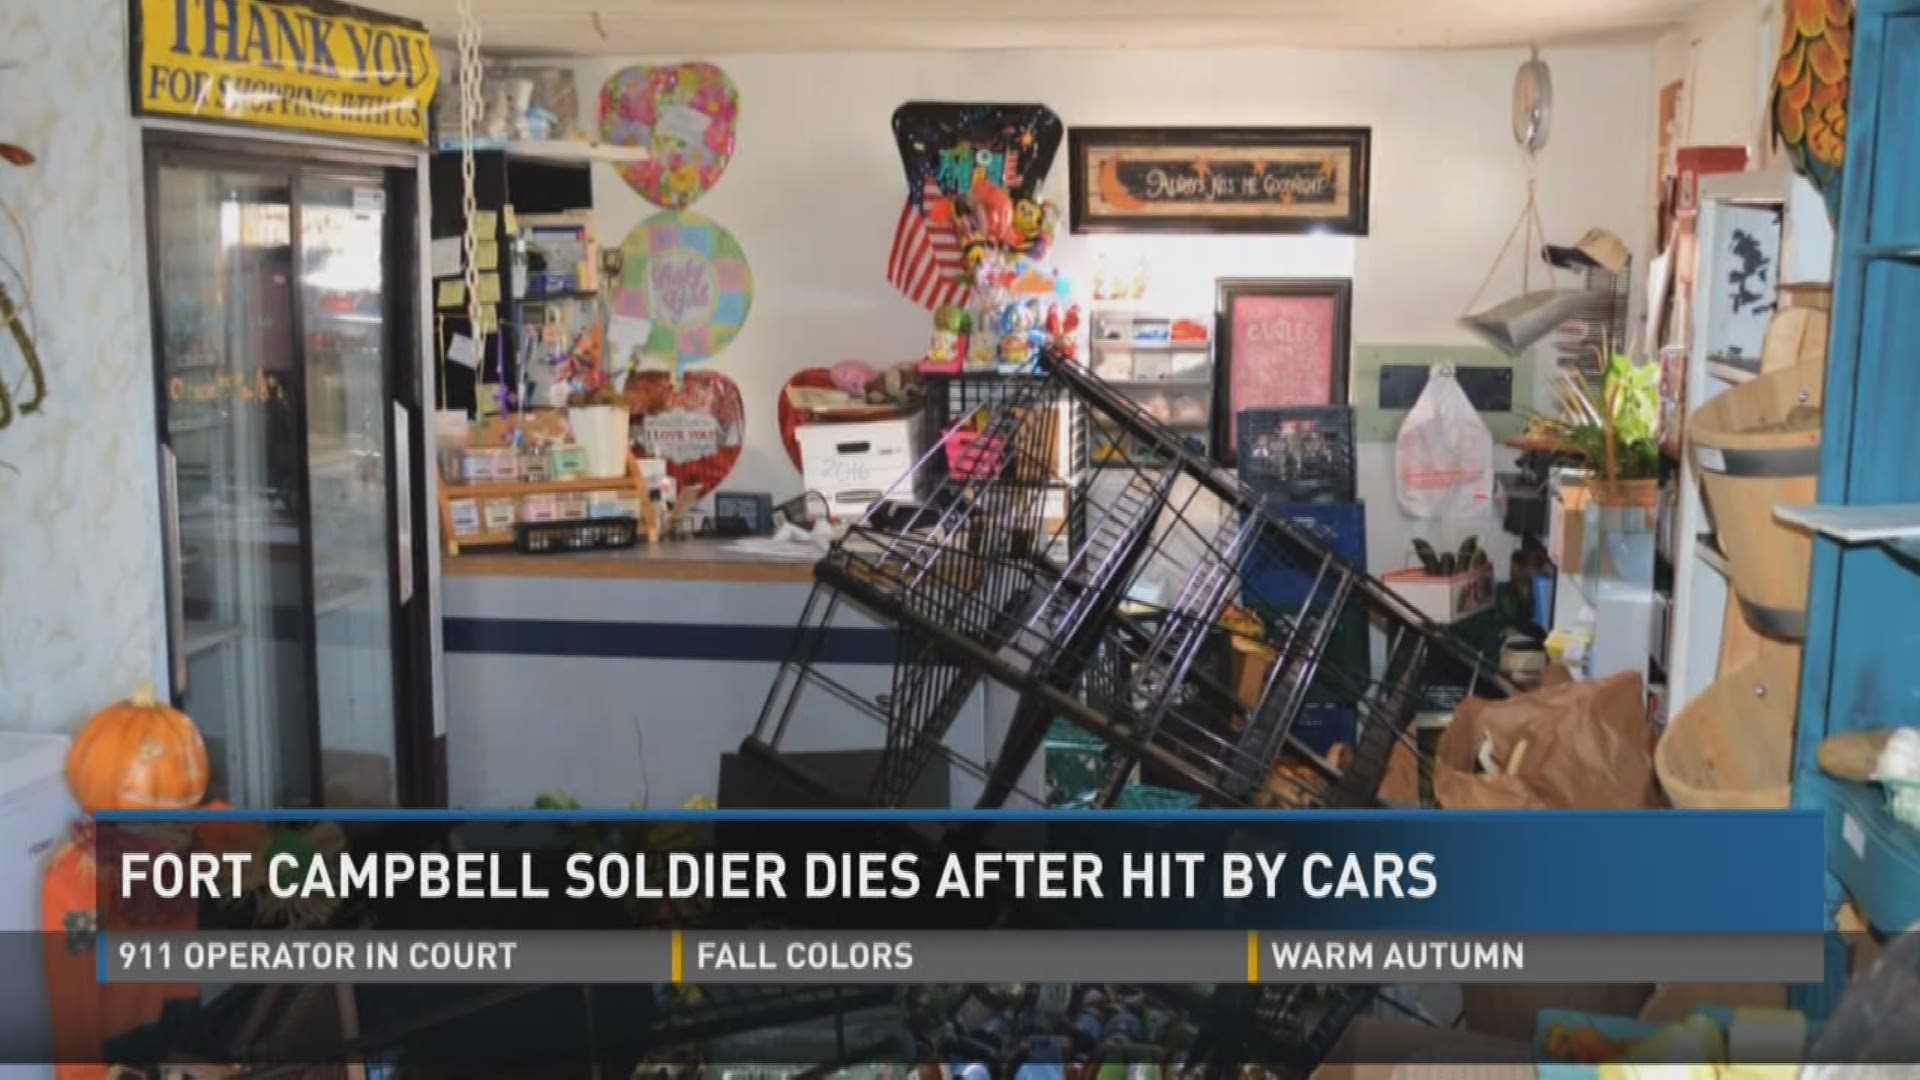 Oct. 17, 2016: A Fort Campbell soldier died over the weekend after deputies say he was attacked by wasps and hit by at least three cars.